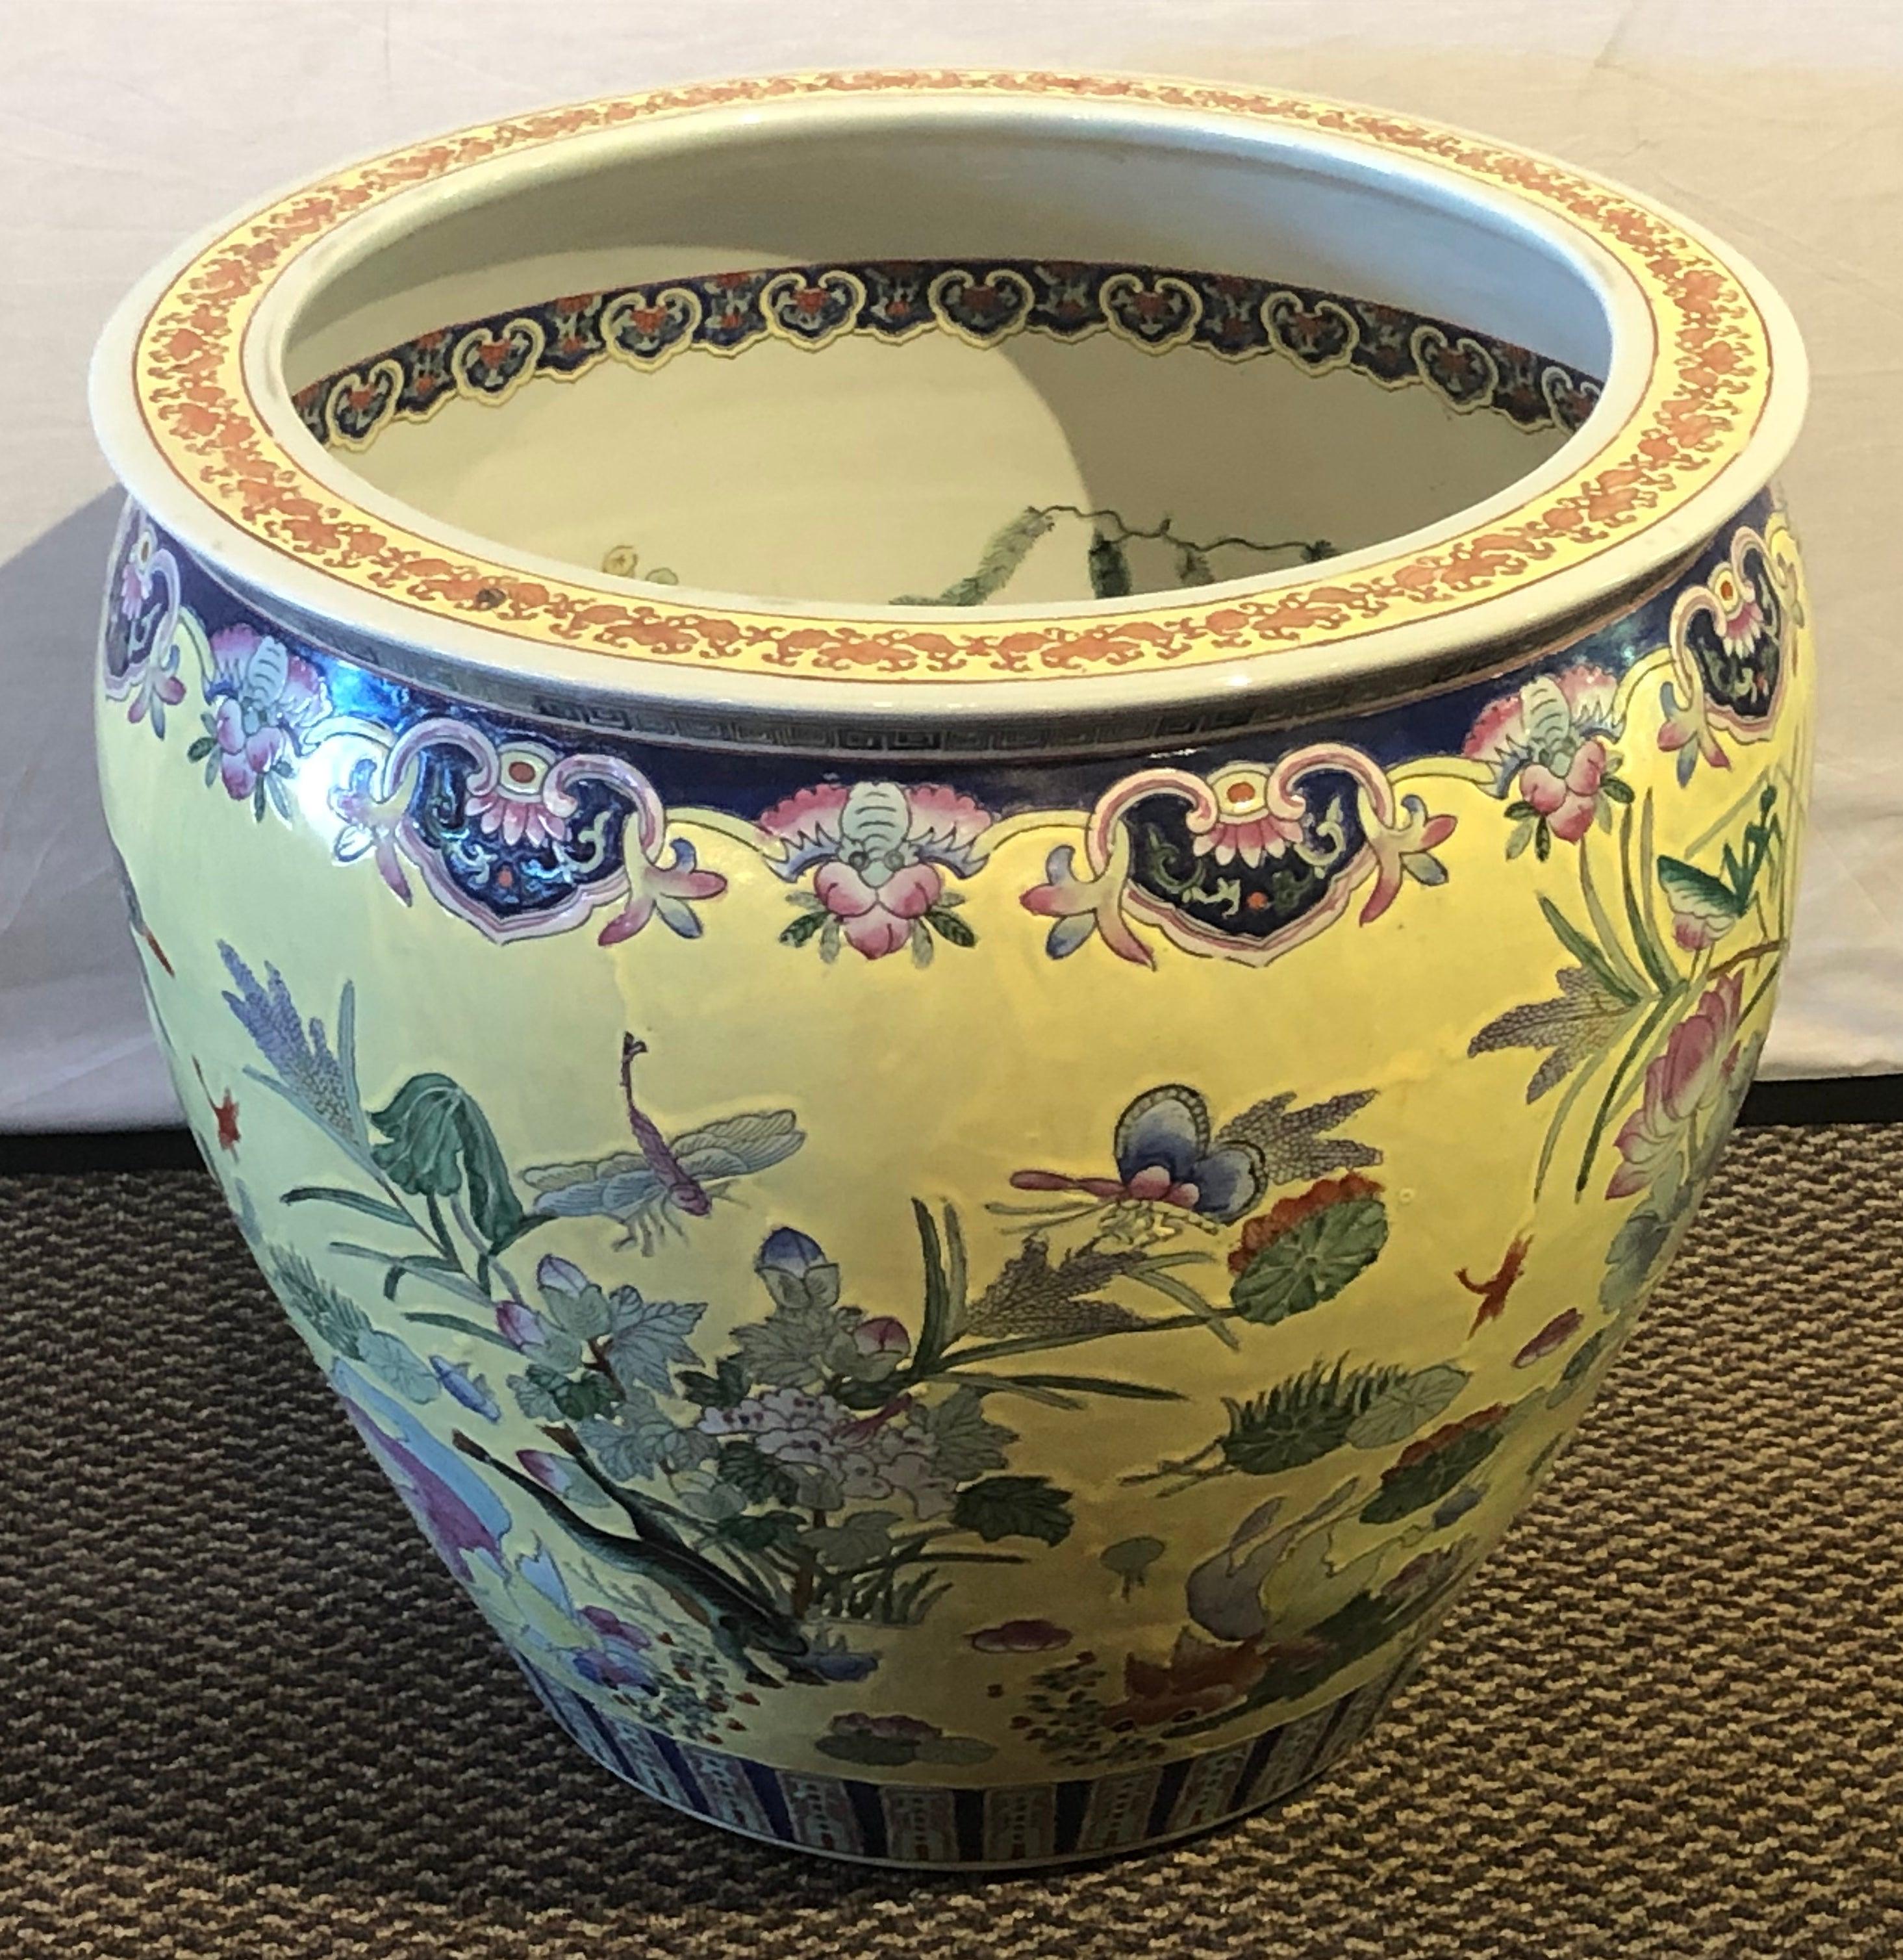 Large vintage late 20th century Chinese Export porcelain jardinière, fish bowl or planter interior and exterior enameled design of fish. Flowers, crickets and others. The large jardinière features a beautiful yellow color and can make a statement in